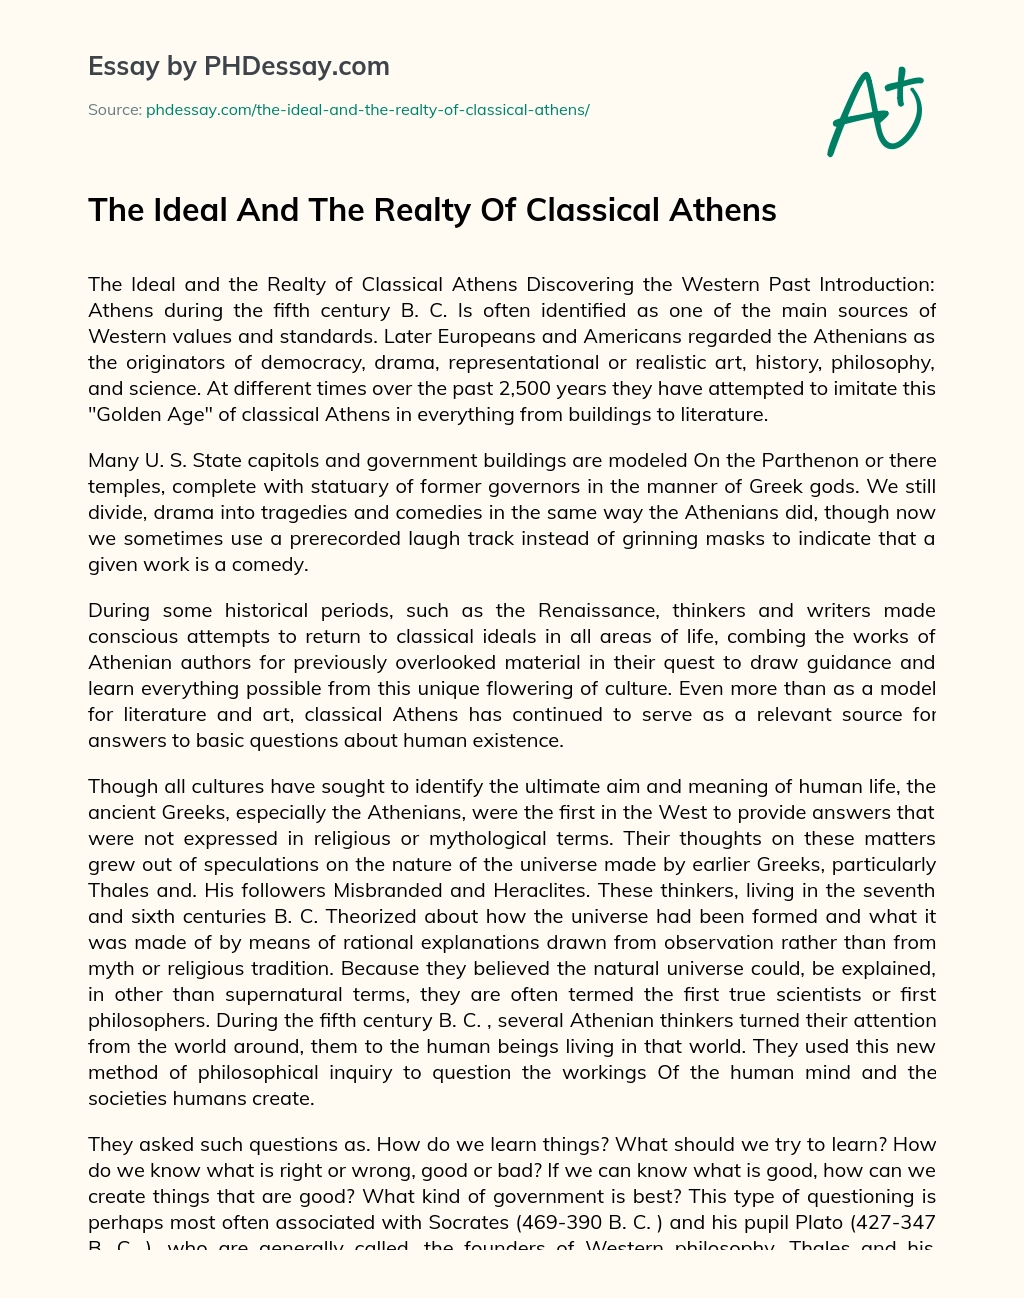 The Ideal And The Realty Of Classical Athens essay